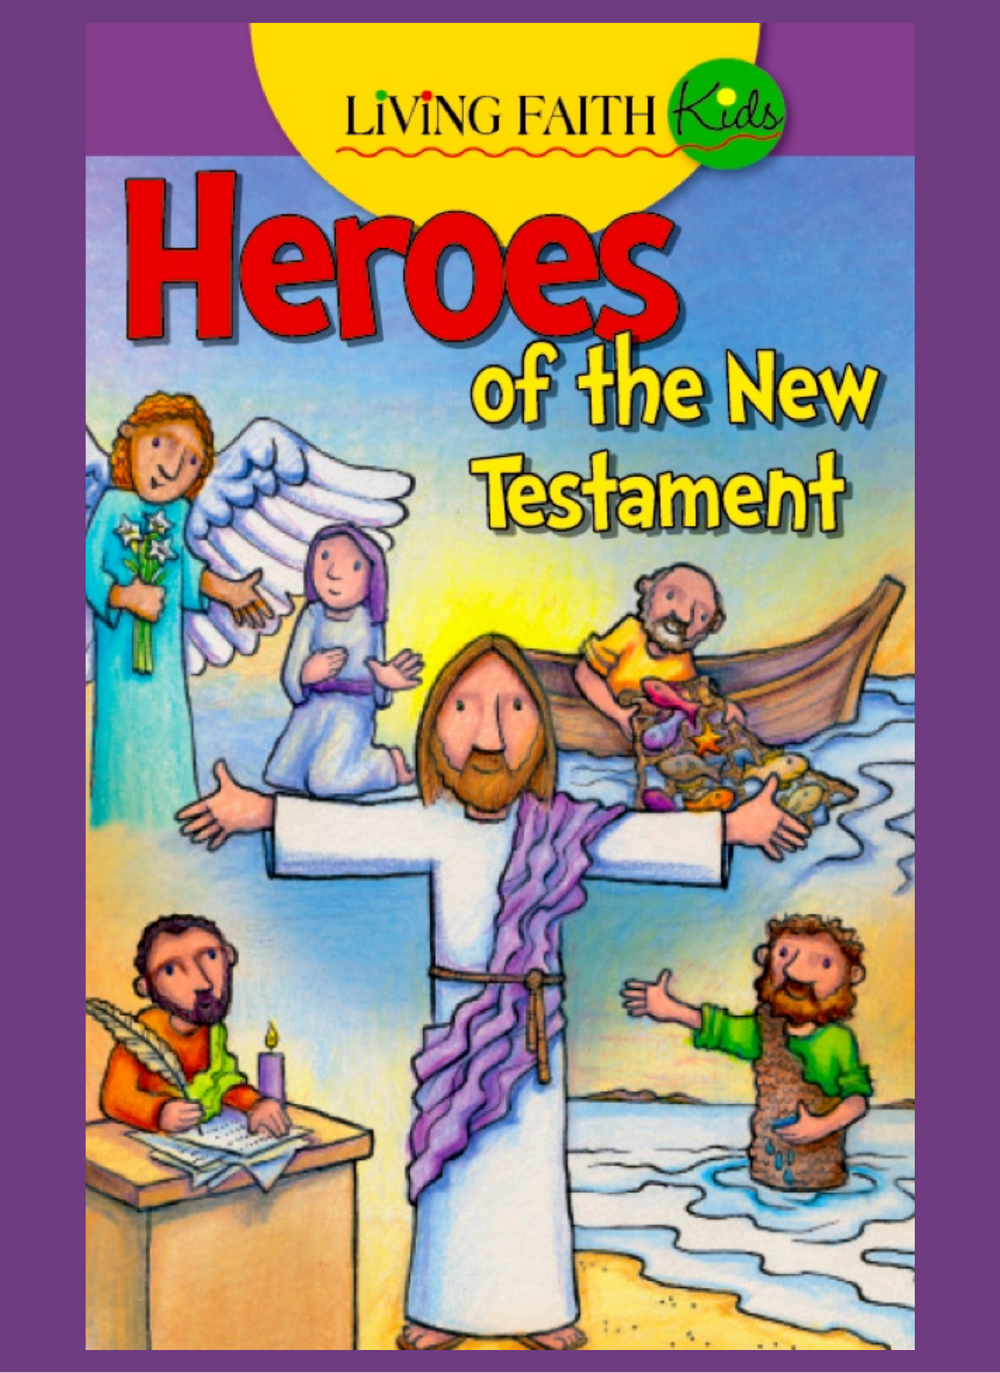 Heroes of the New Testament